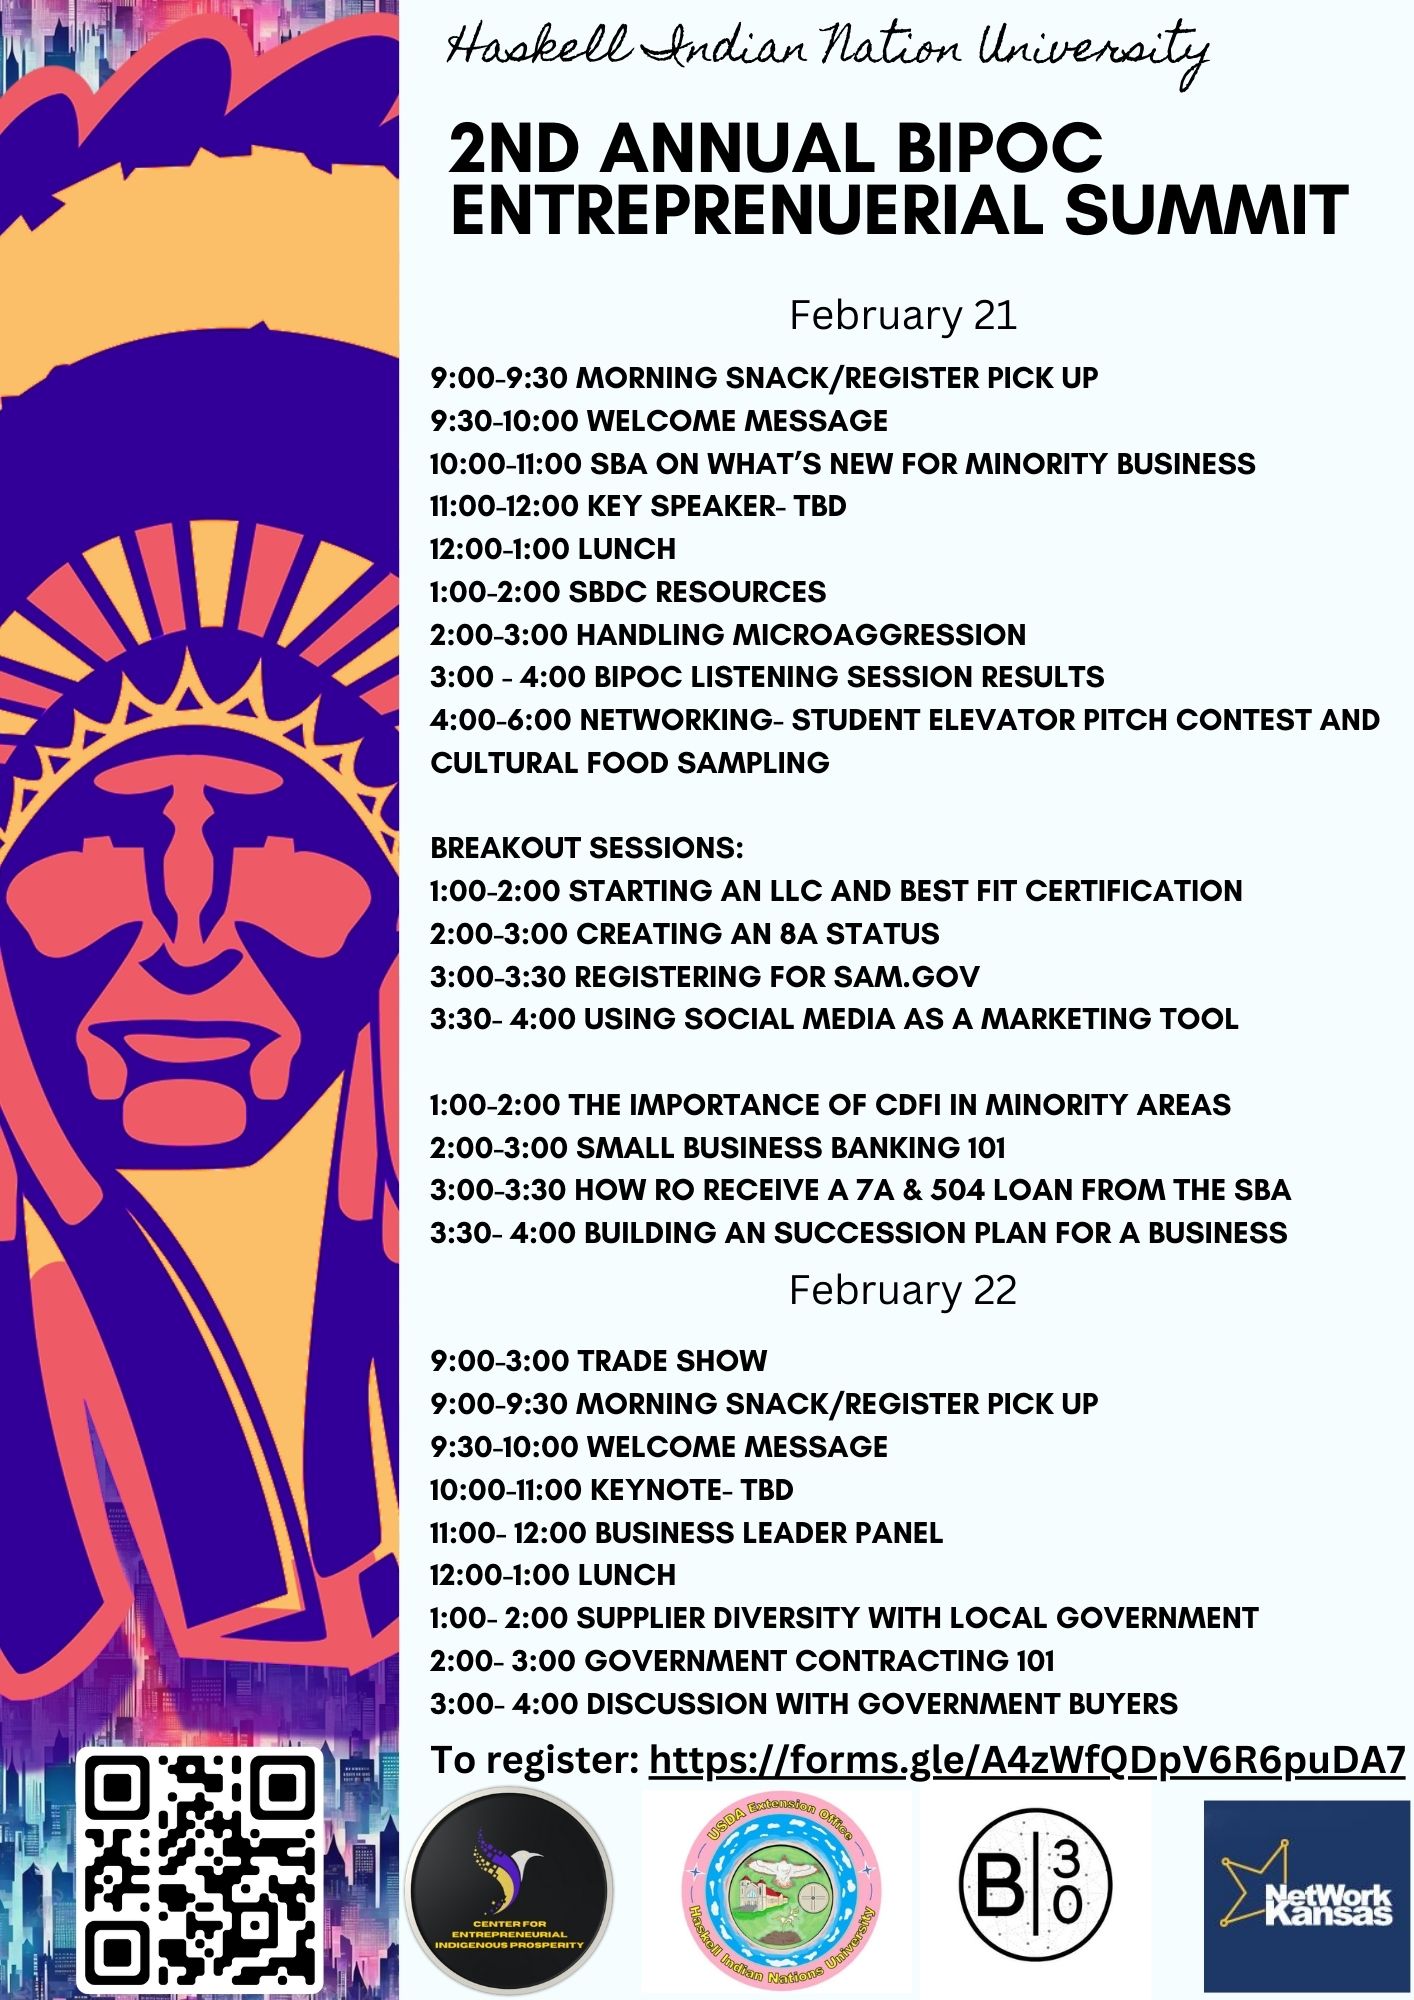 BIPOC Event Flyer and Schedule